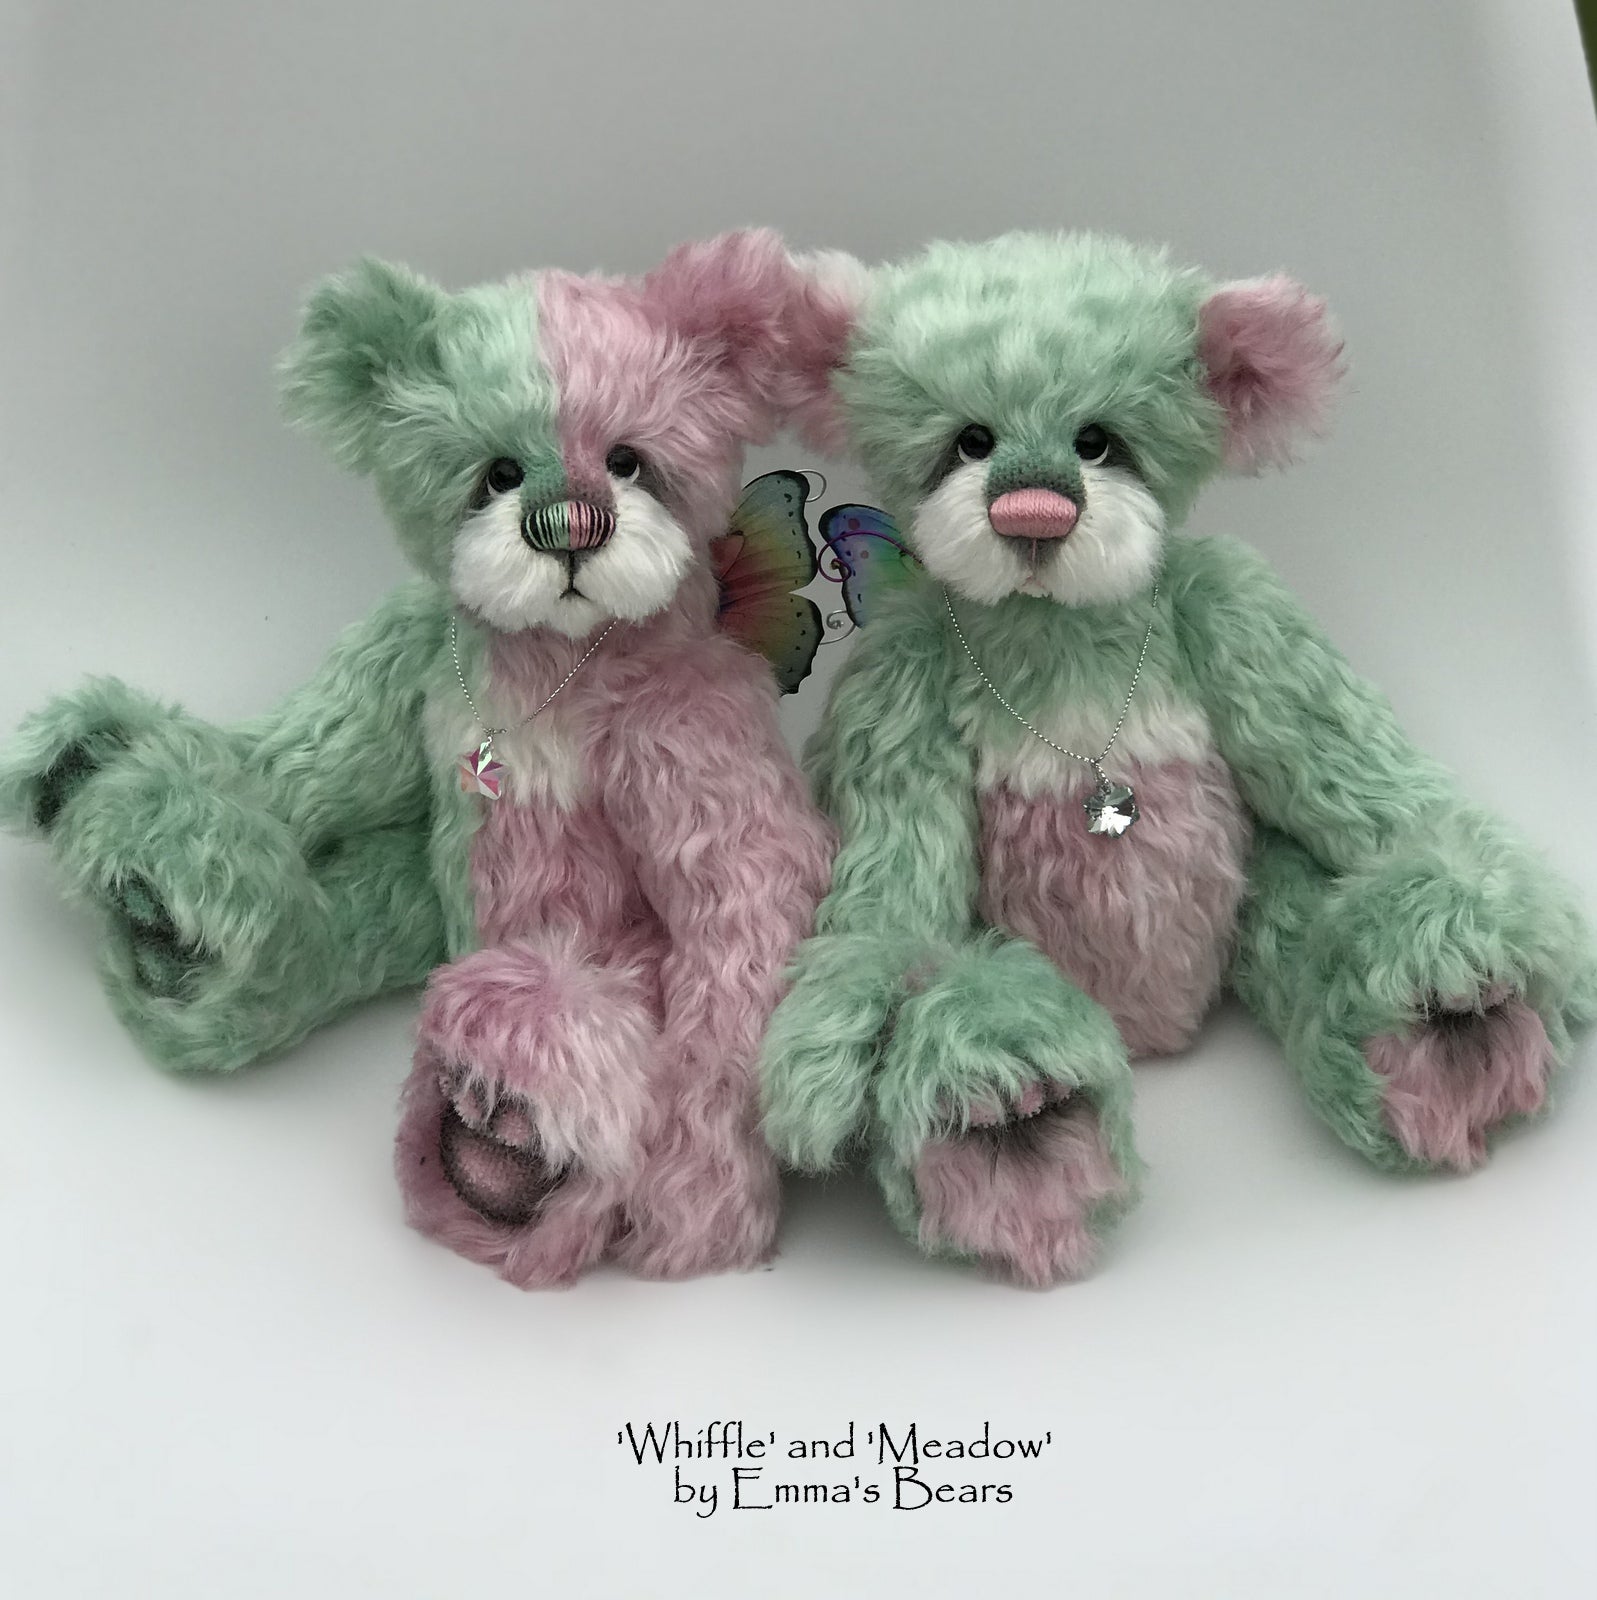 Whiffle - 10" Hand dyed artist Easter Butterfly Bear by Emma's Bears - OOAK